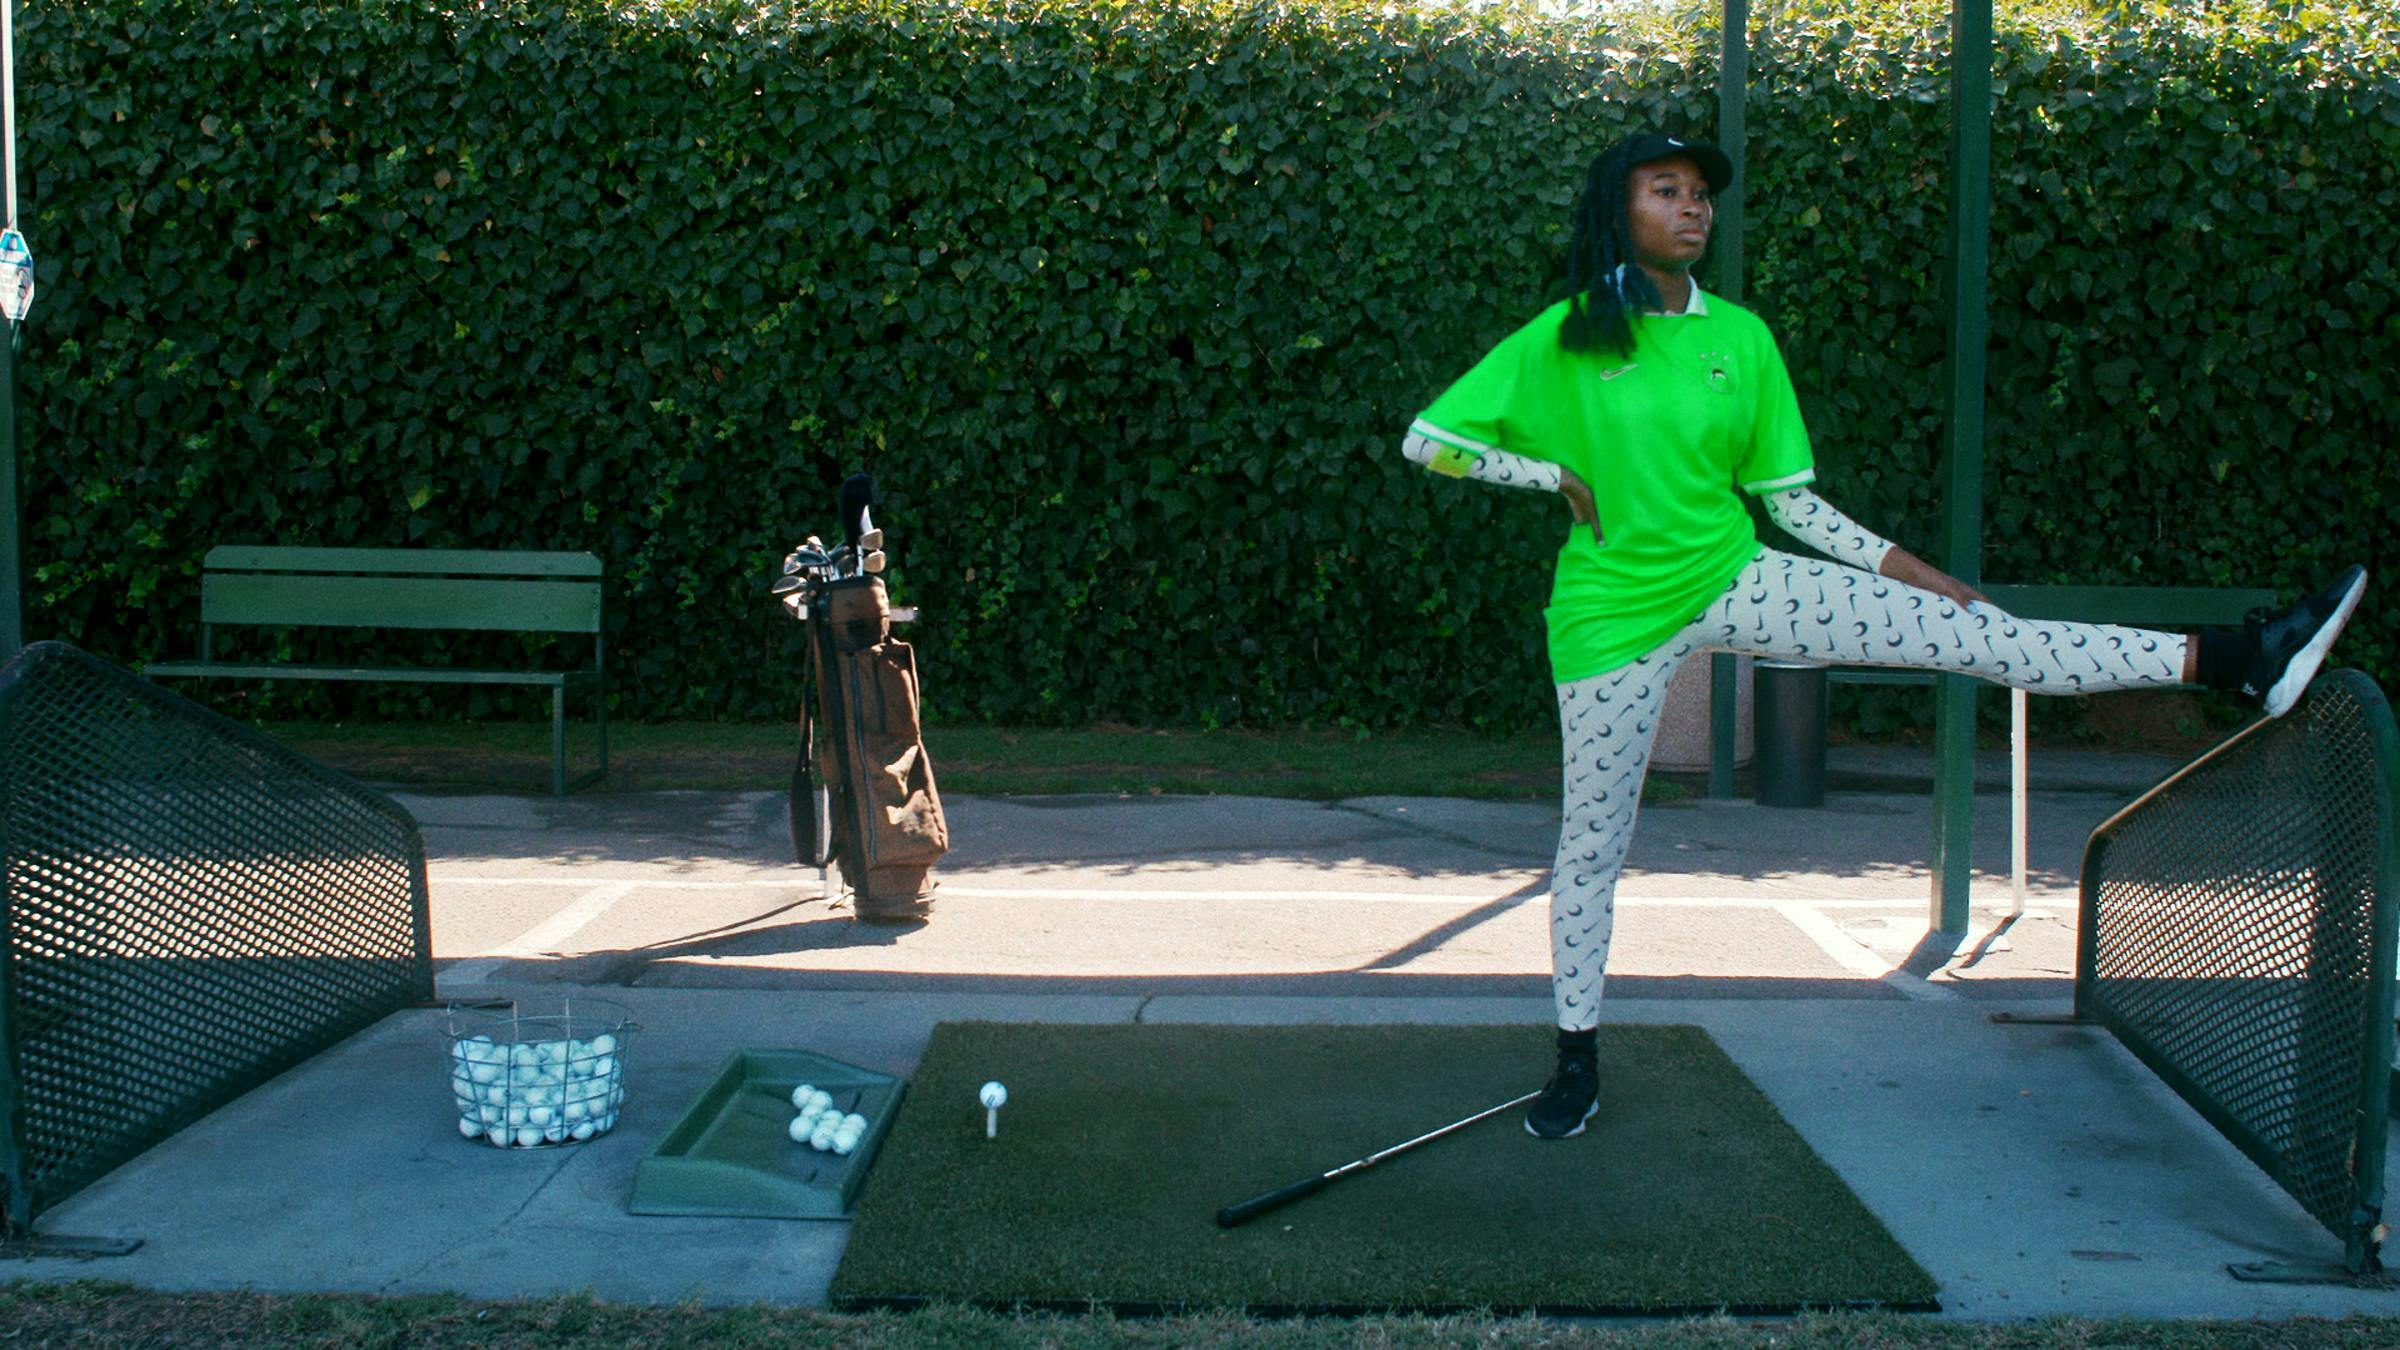 The artist is standing with a stretched leg in a golf practicing course. She is wearing a green jumper and patterned leggings. The sun is shining.